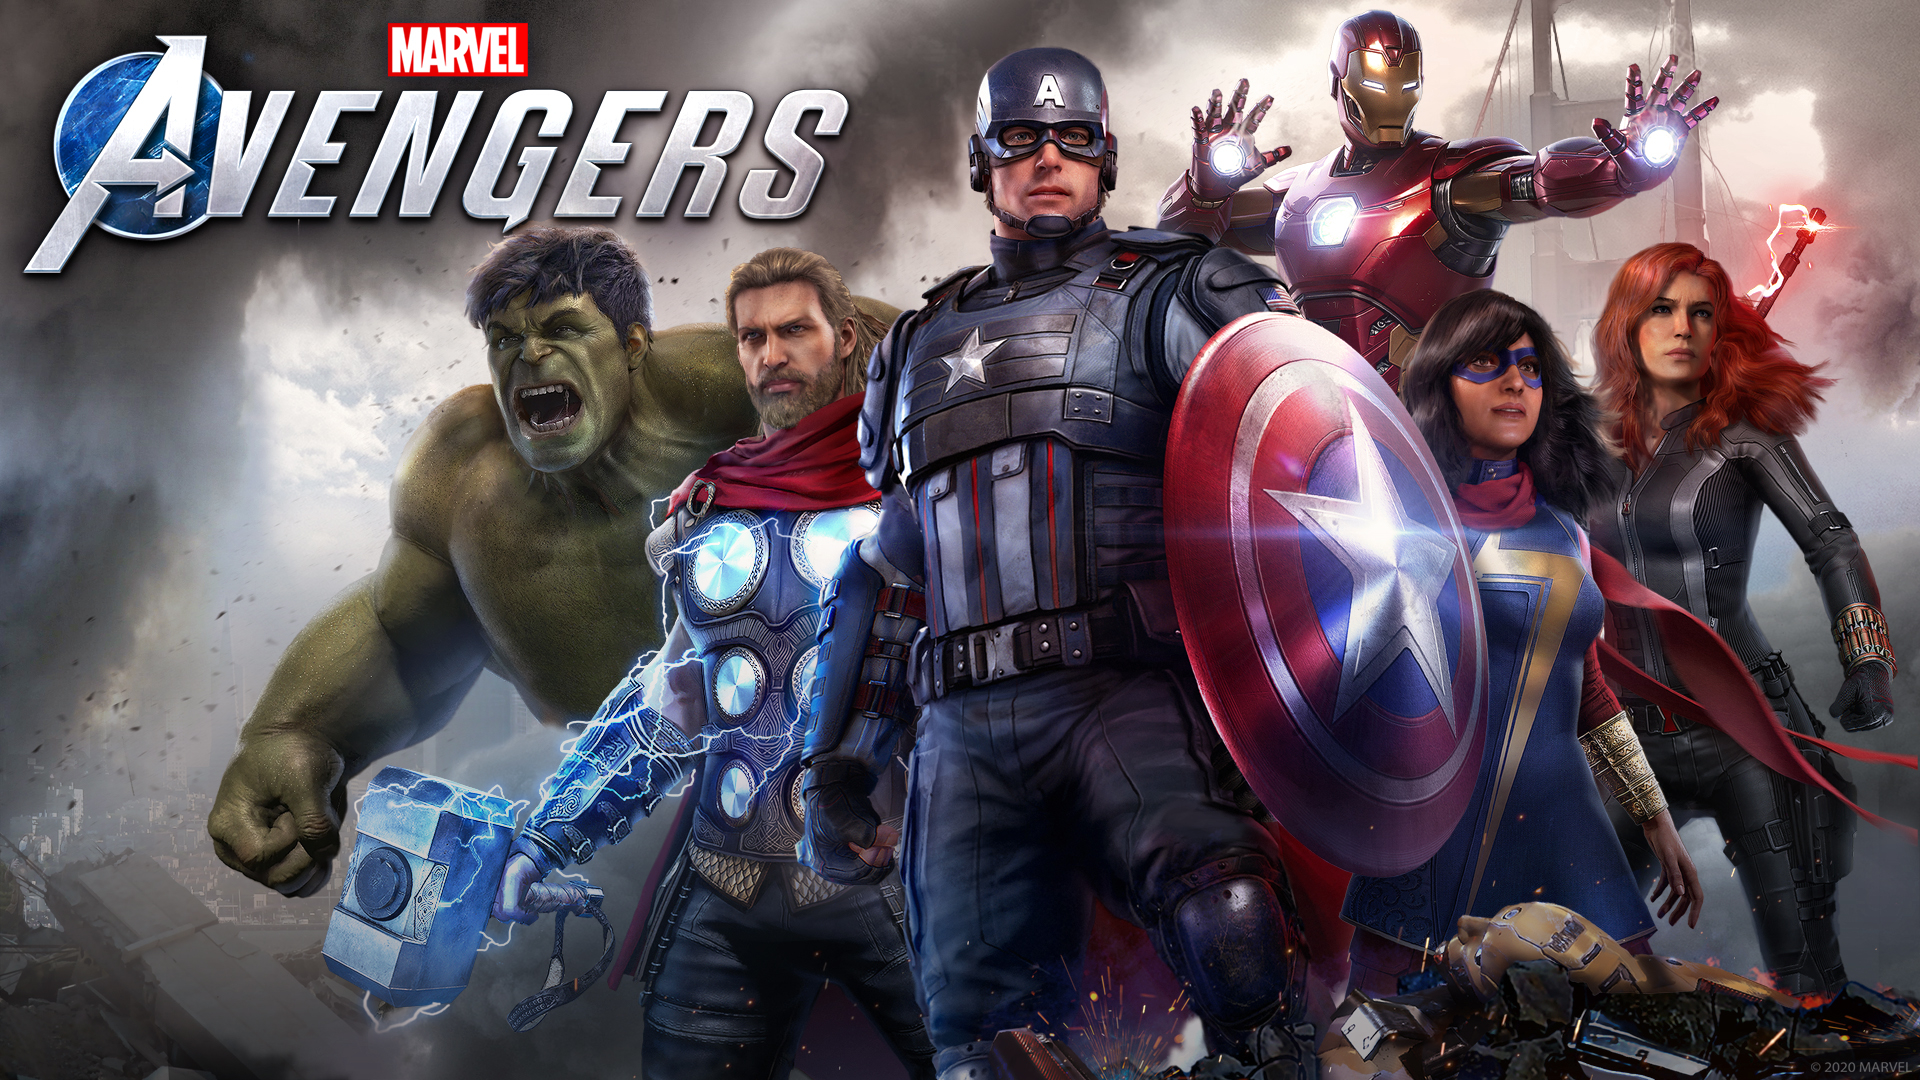 Marvel’s Avengers Video Game Wallpaper, HD Games 4K Wallpapers, Images